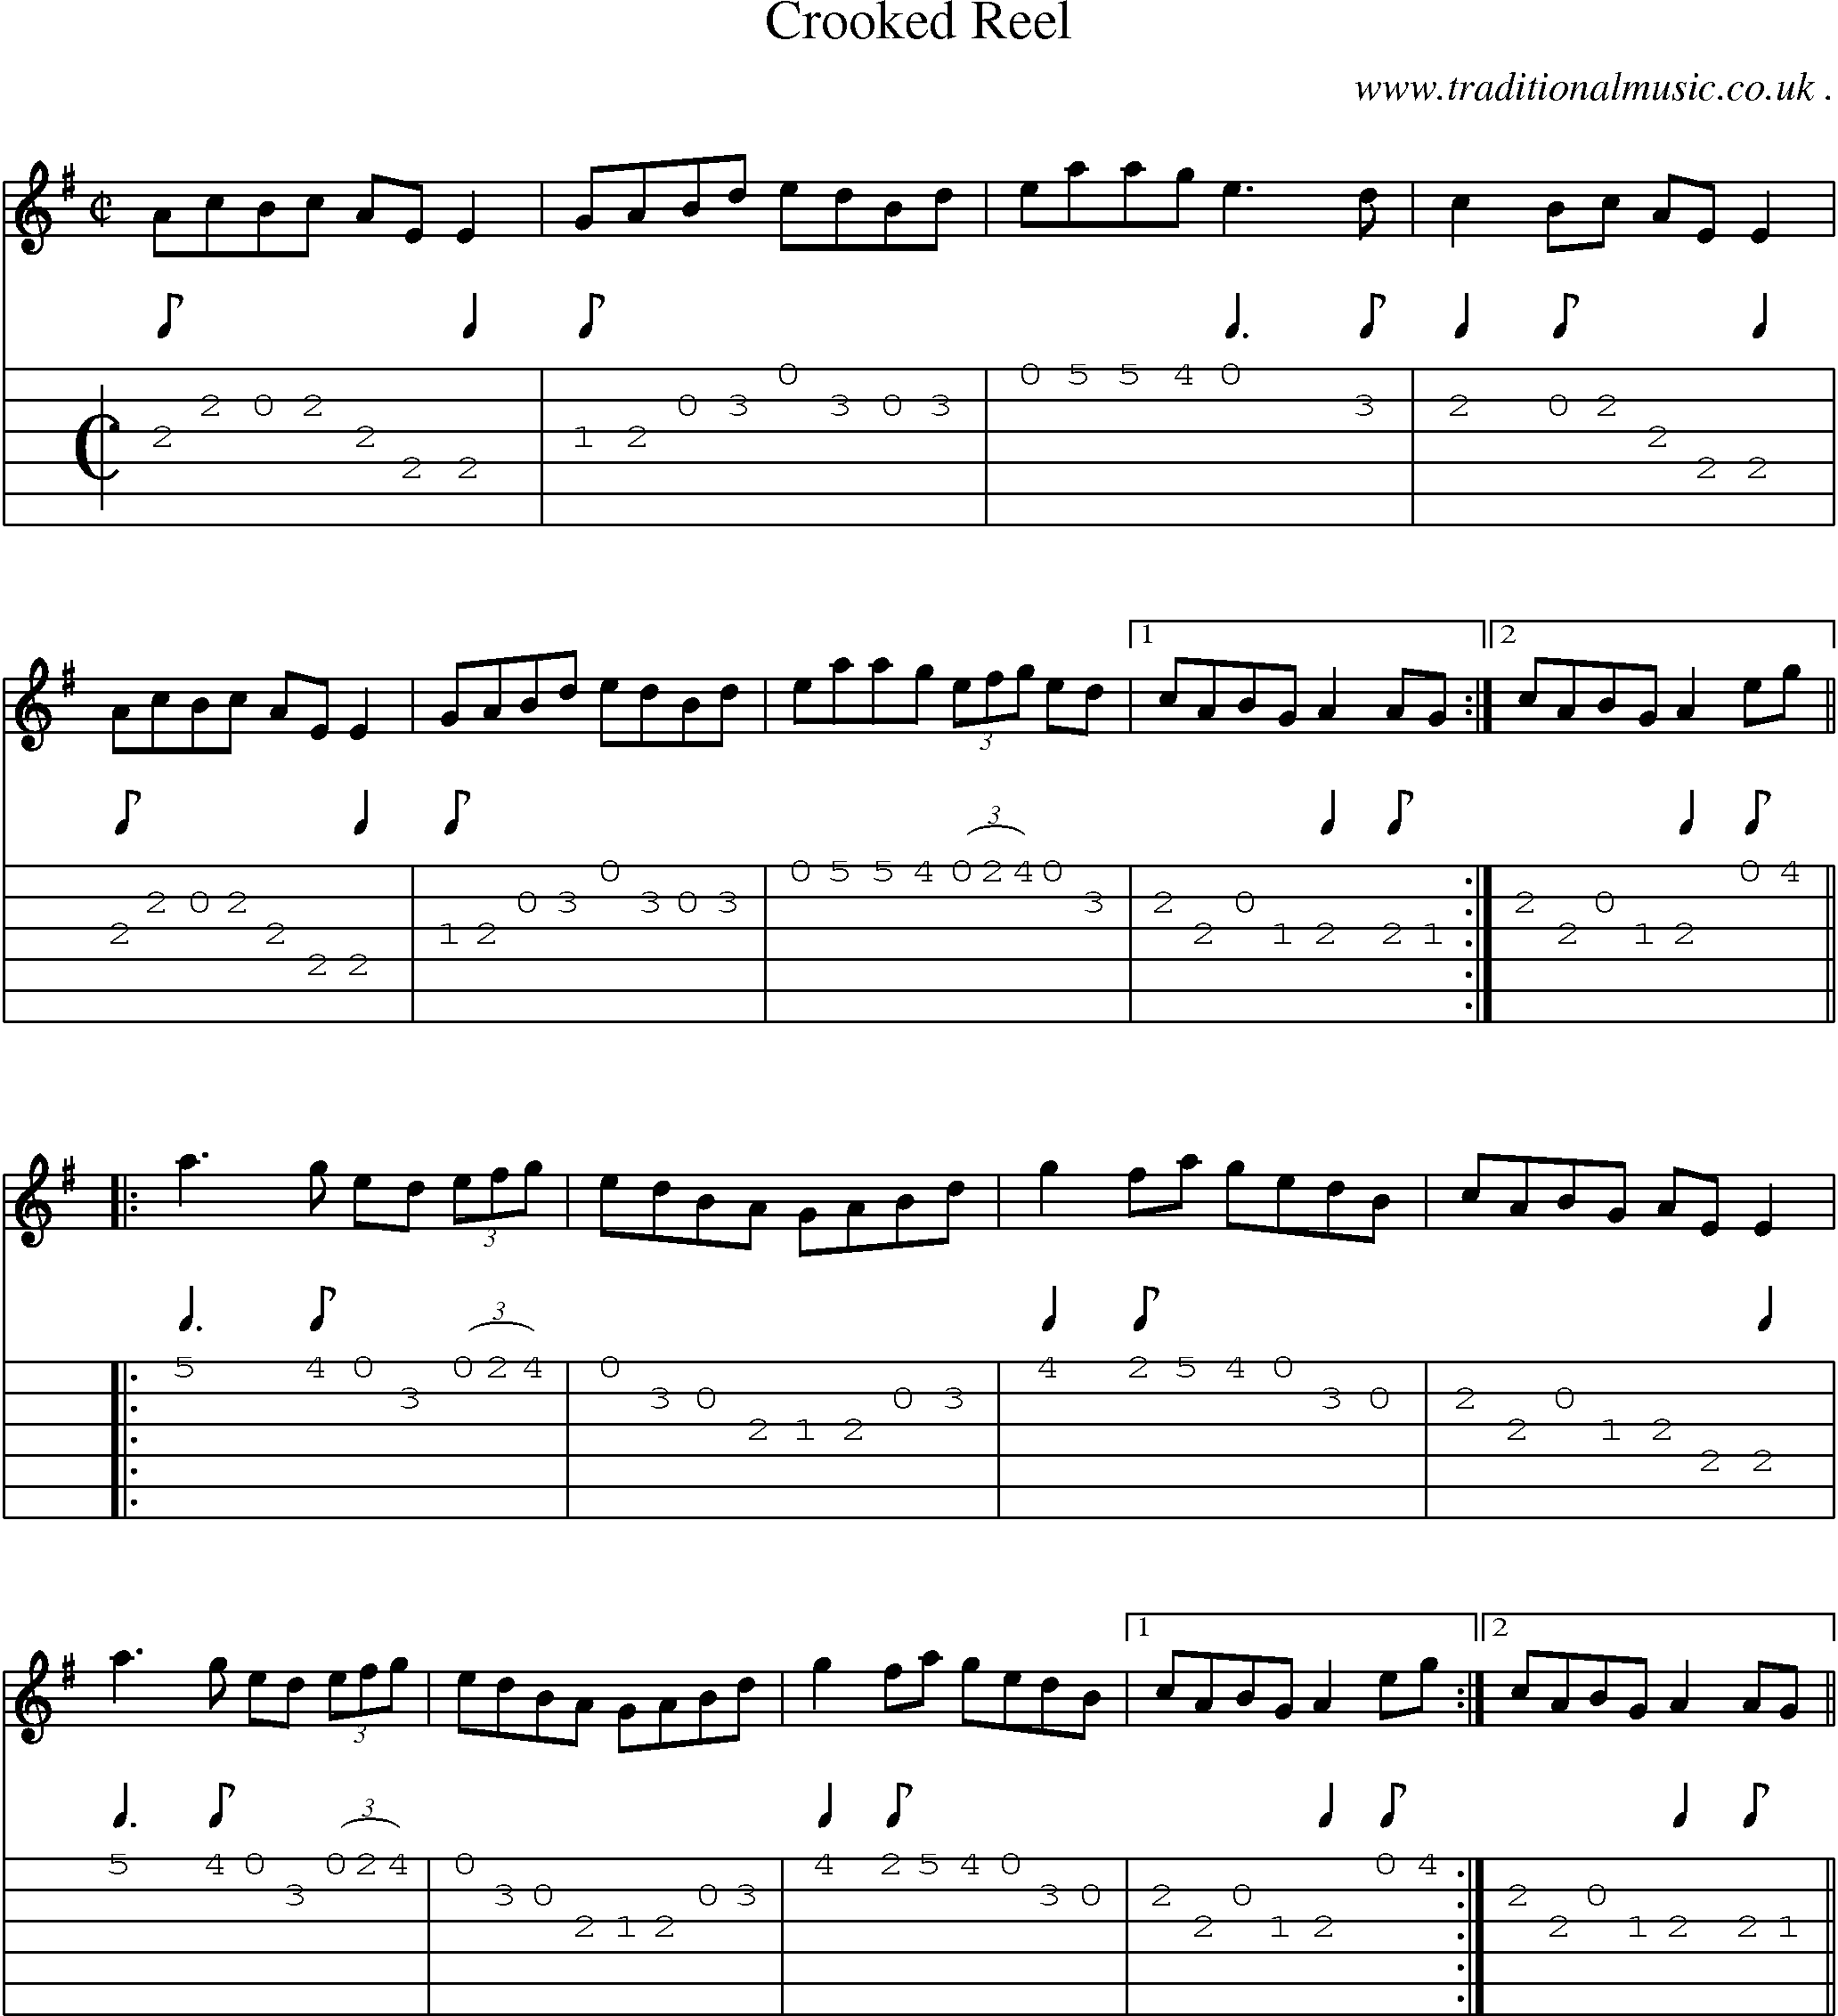 Sheet-Music and Guitar Tabs for Crooked Reel